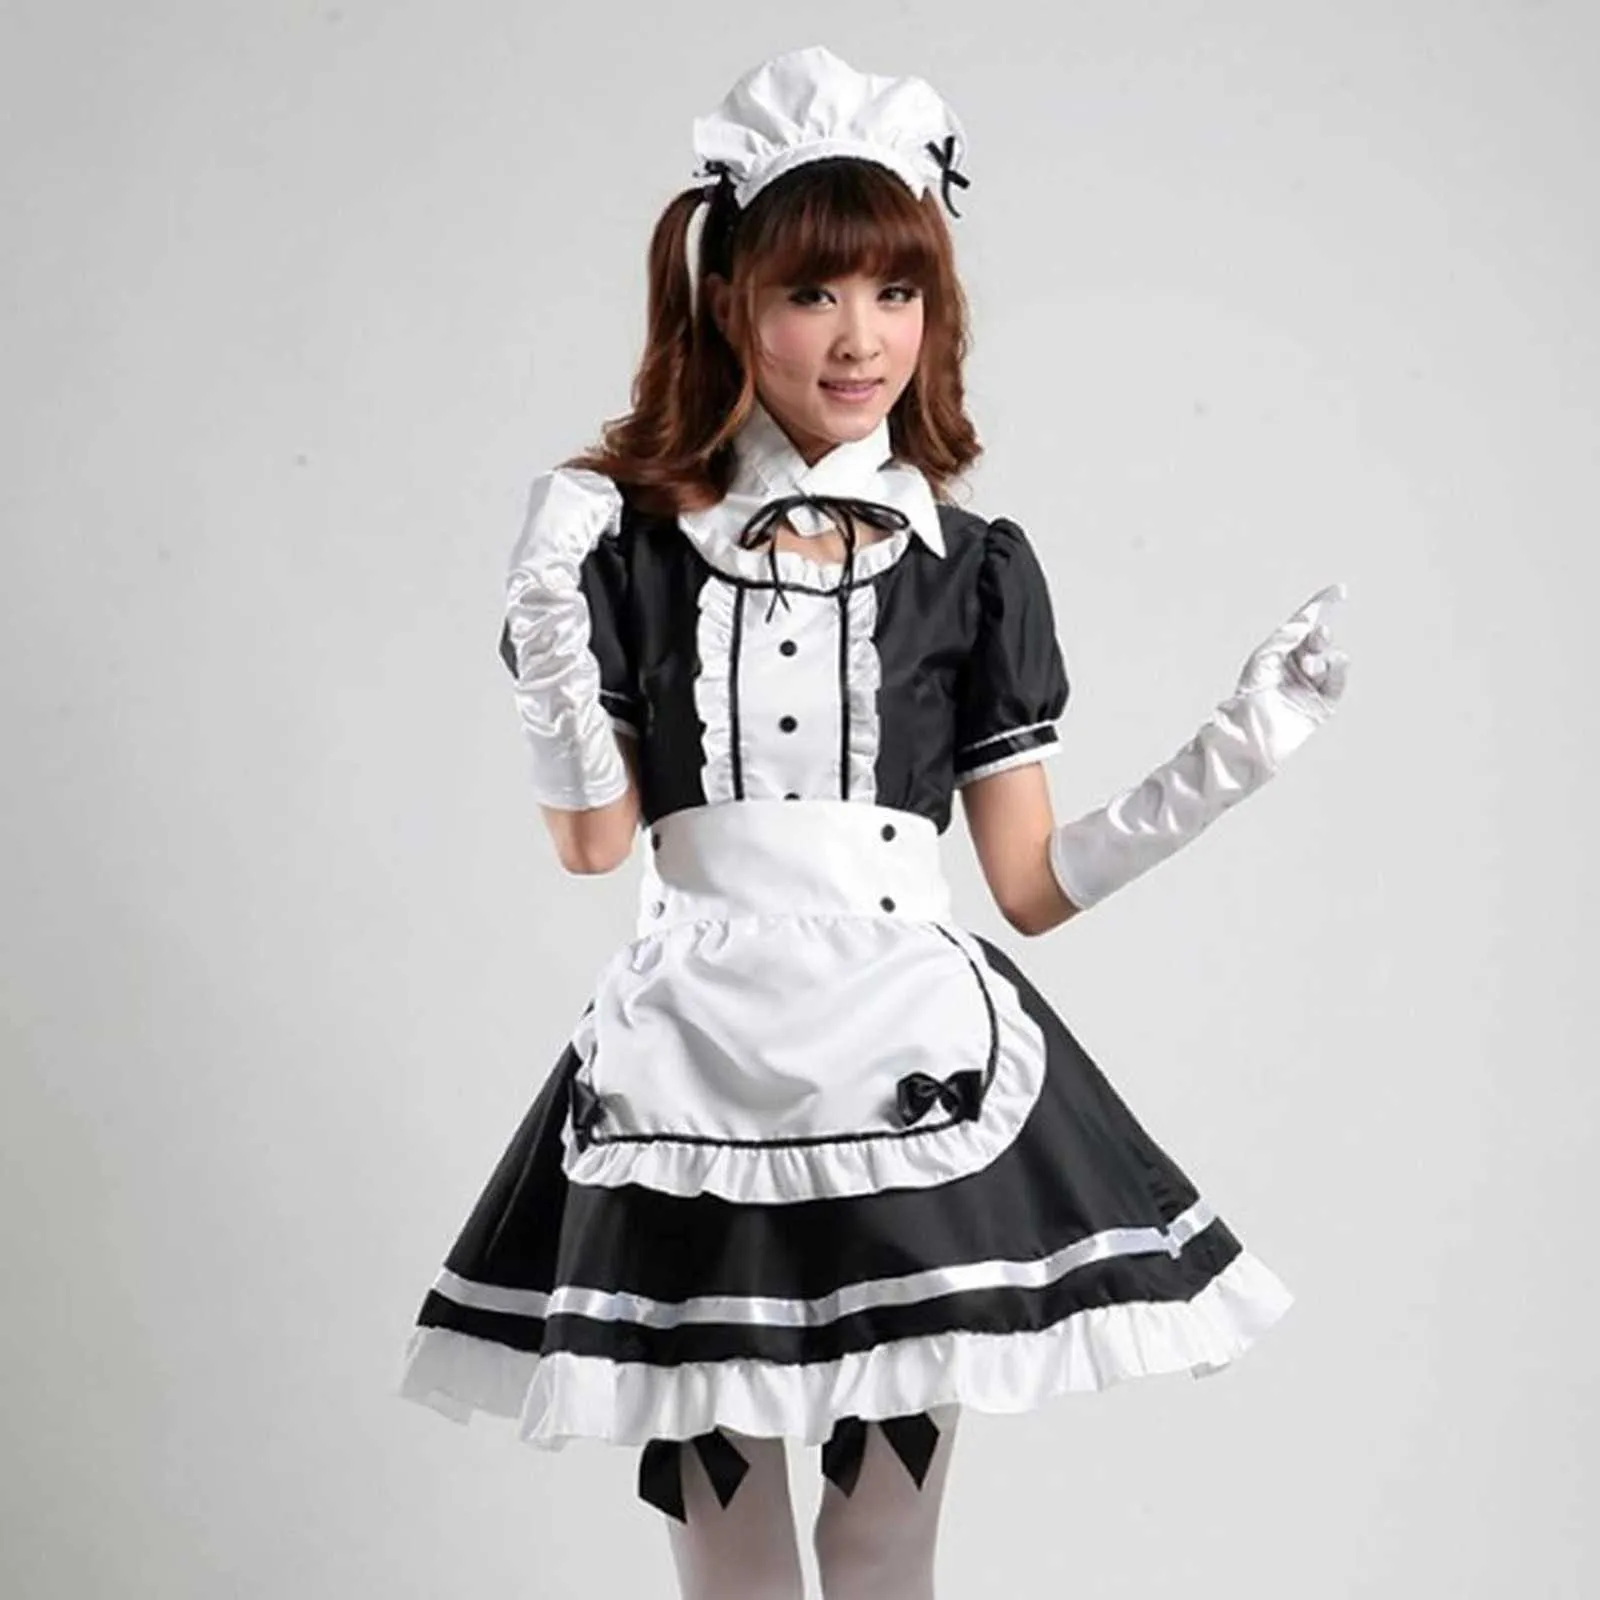 2021 Sexy Lingerie Lolita Maid Costume Cosplay Donne Copricapo Grembiule Falso Collare Bowknot Abito Nero Halloween Party Outfit Y0903